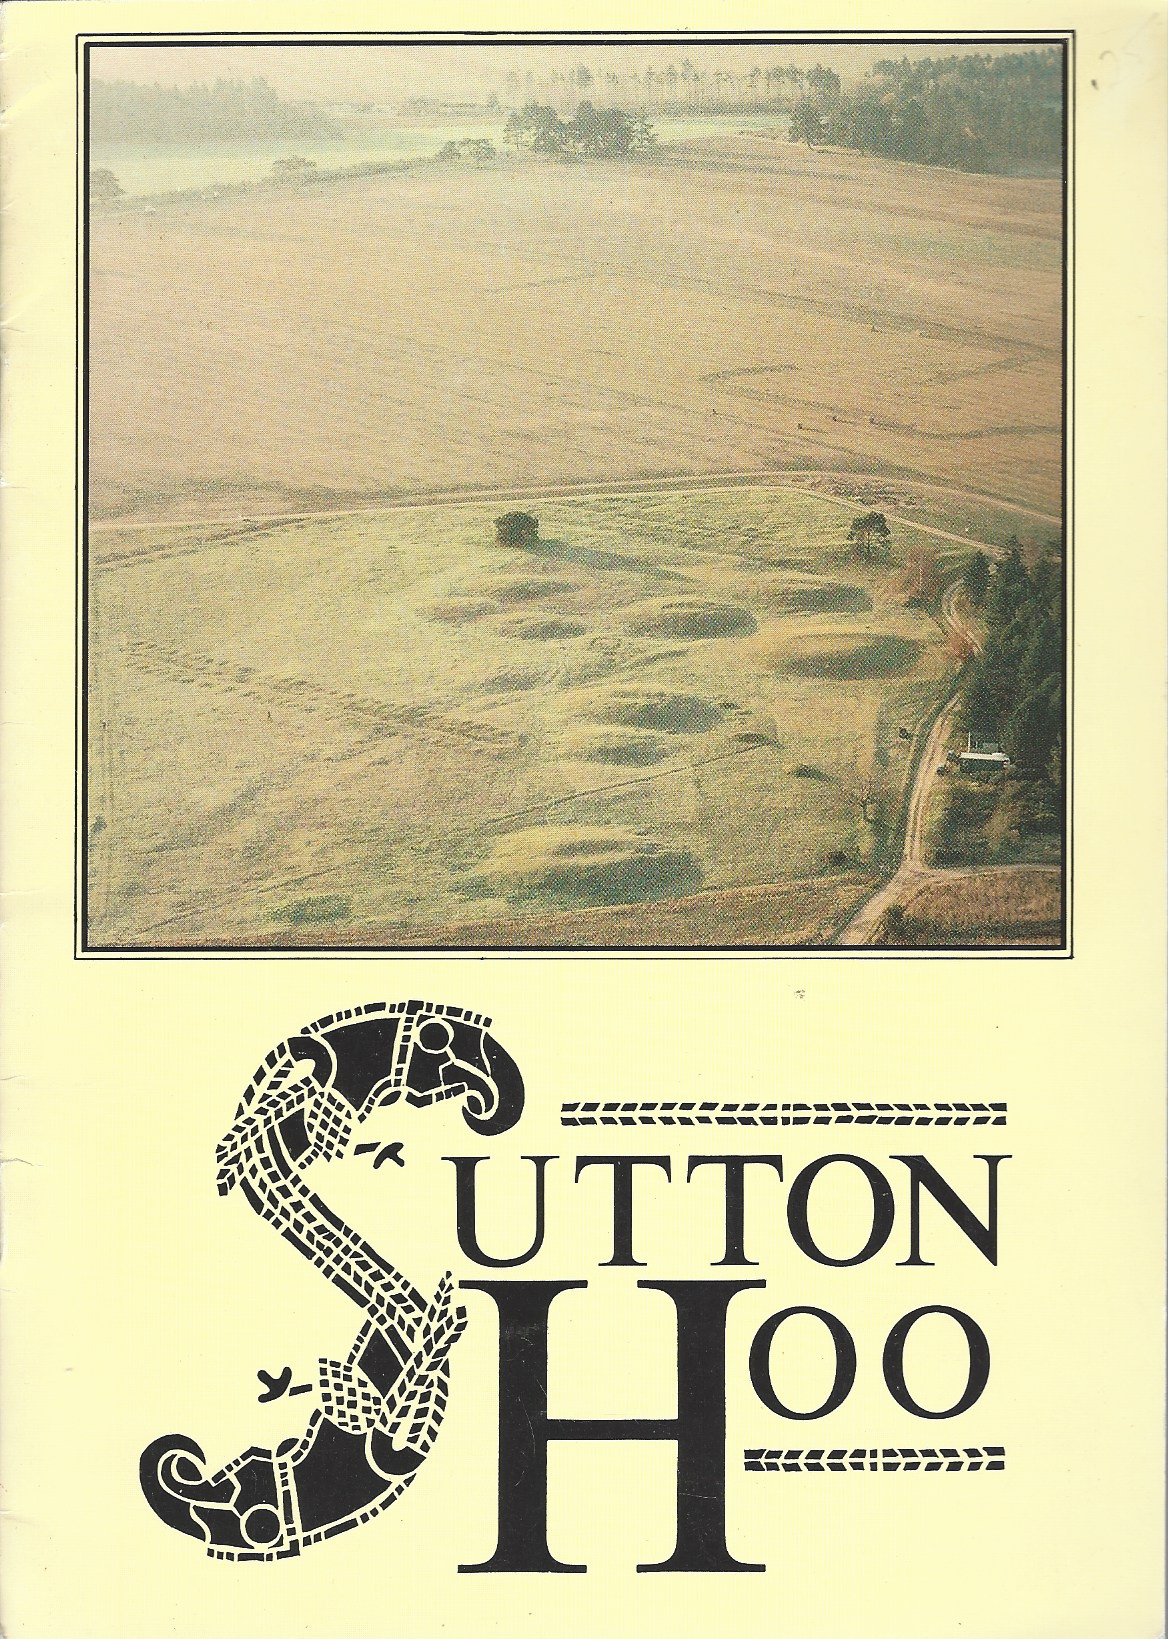 CARVER M. O. H. - Sutton Hoo (1987) the Burial Ground of the Anglo Saxon Kings of East Anglia